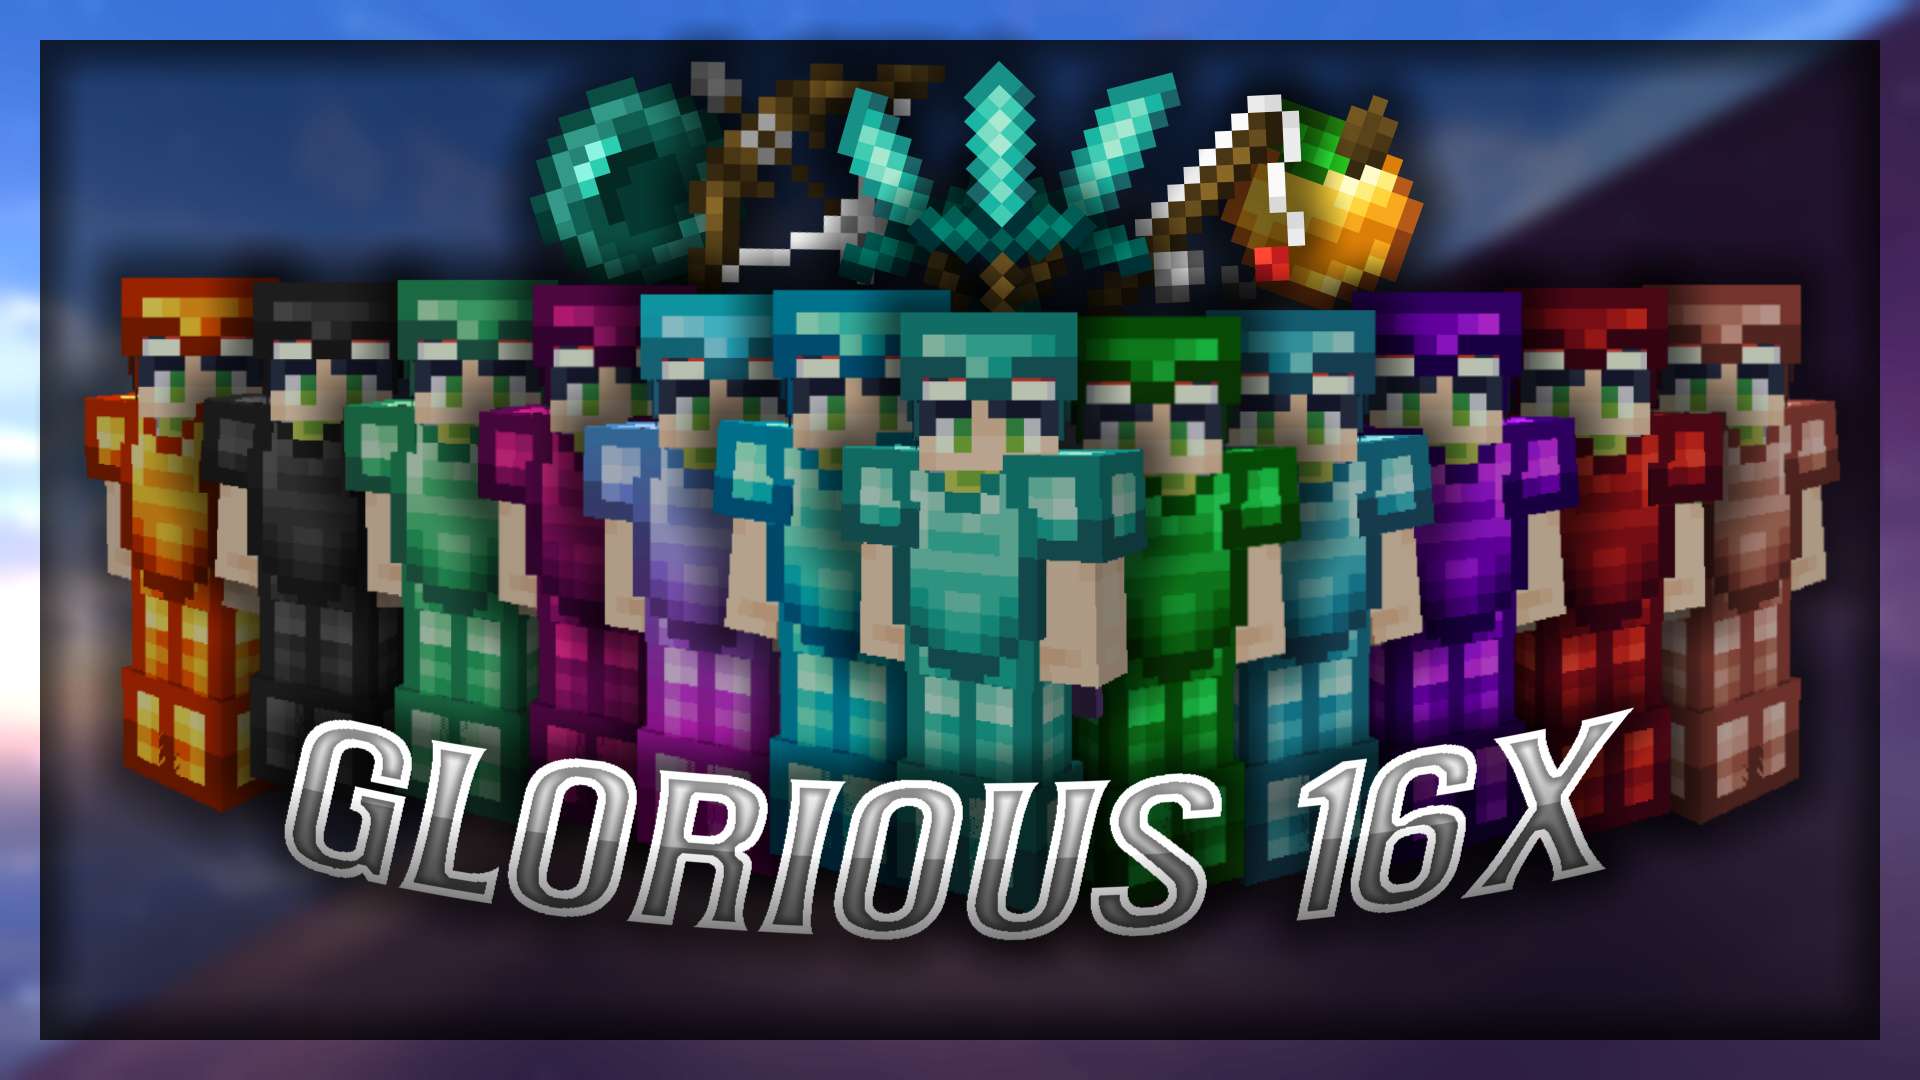 (open zip with WinRAR) Glorious - Green 16 by Mek on PvPRP